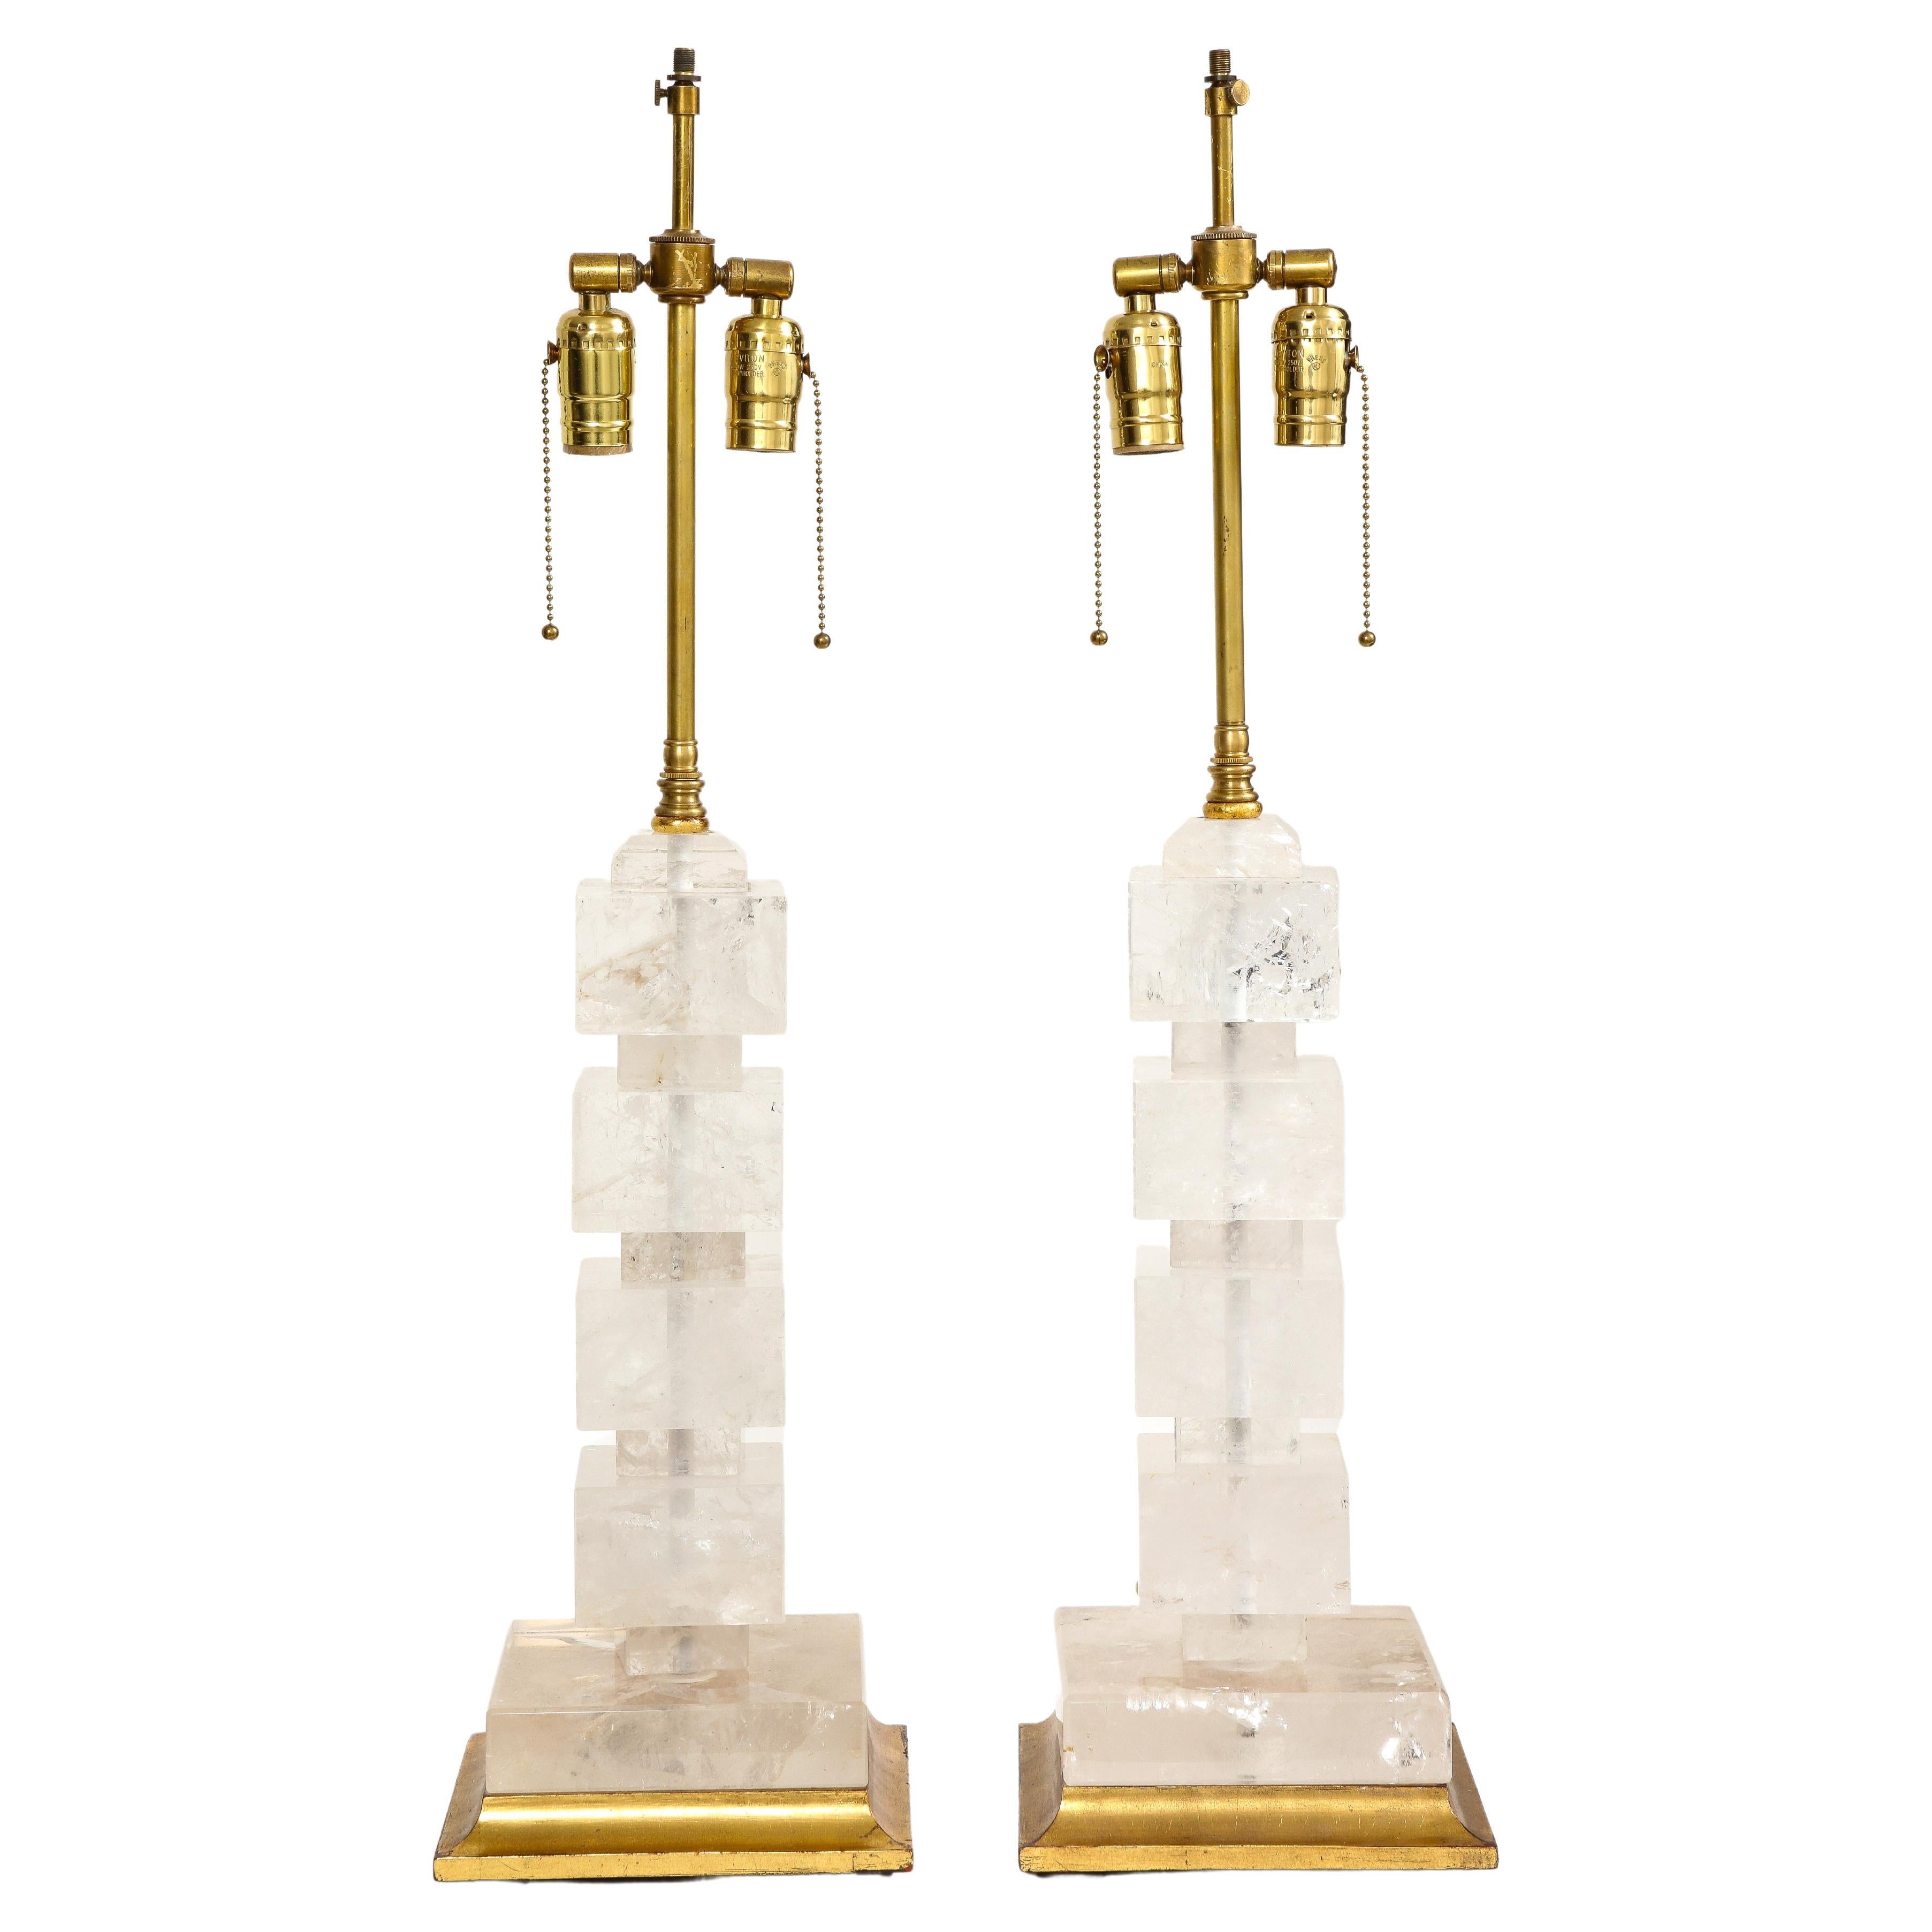 A Pair of French Art Deco Period Rock Crystal and Giltwood Square Lamps